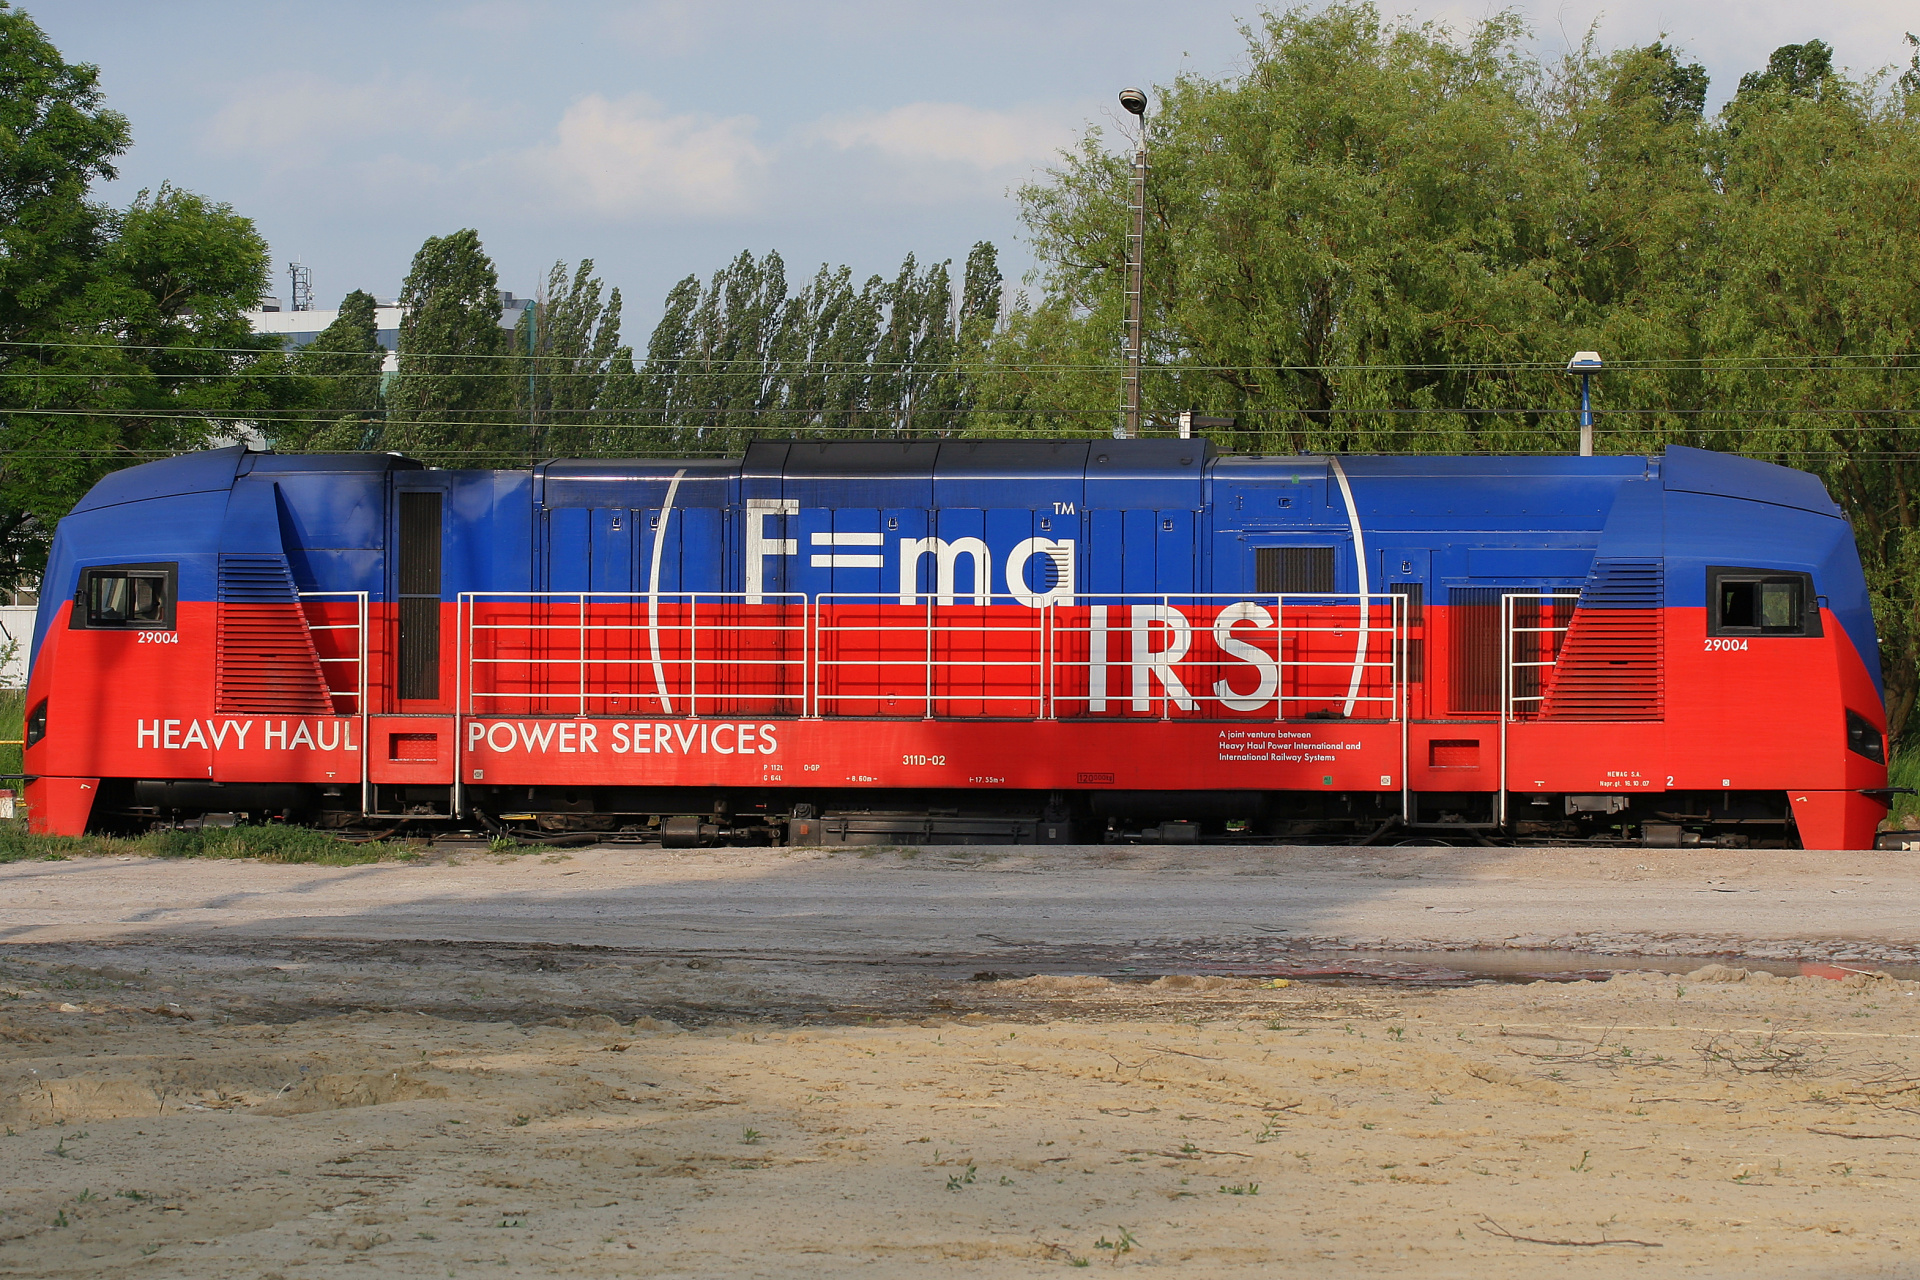 Newag 311D-02 (Vehicles » Trains and Locomotives)